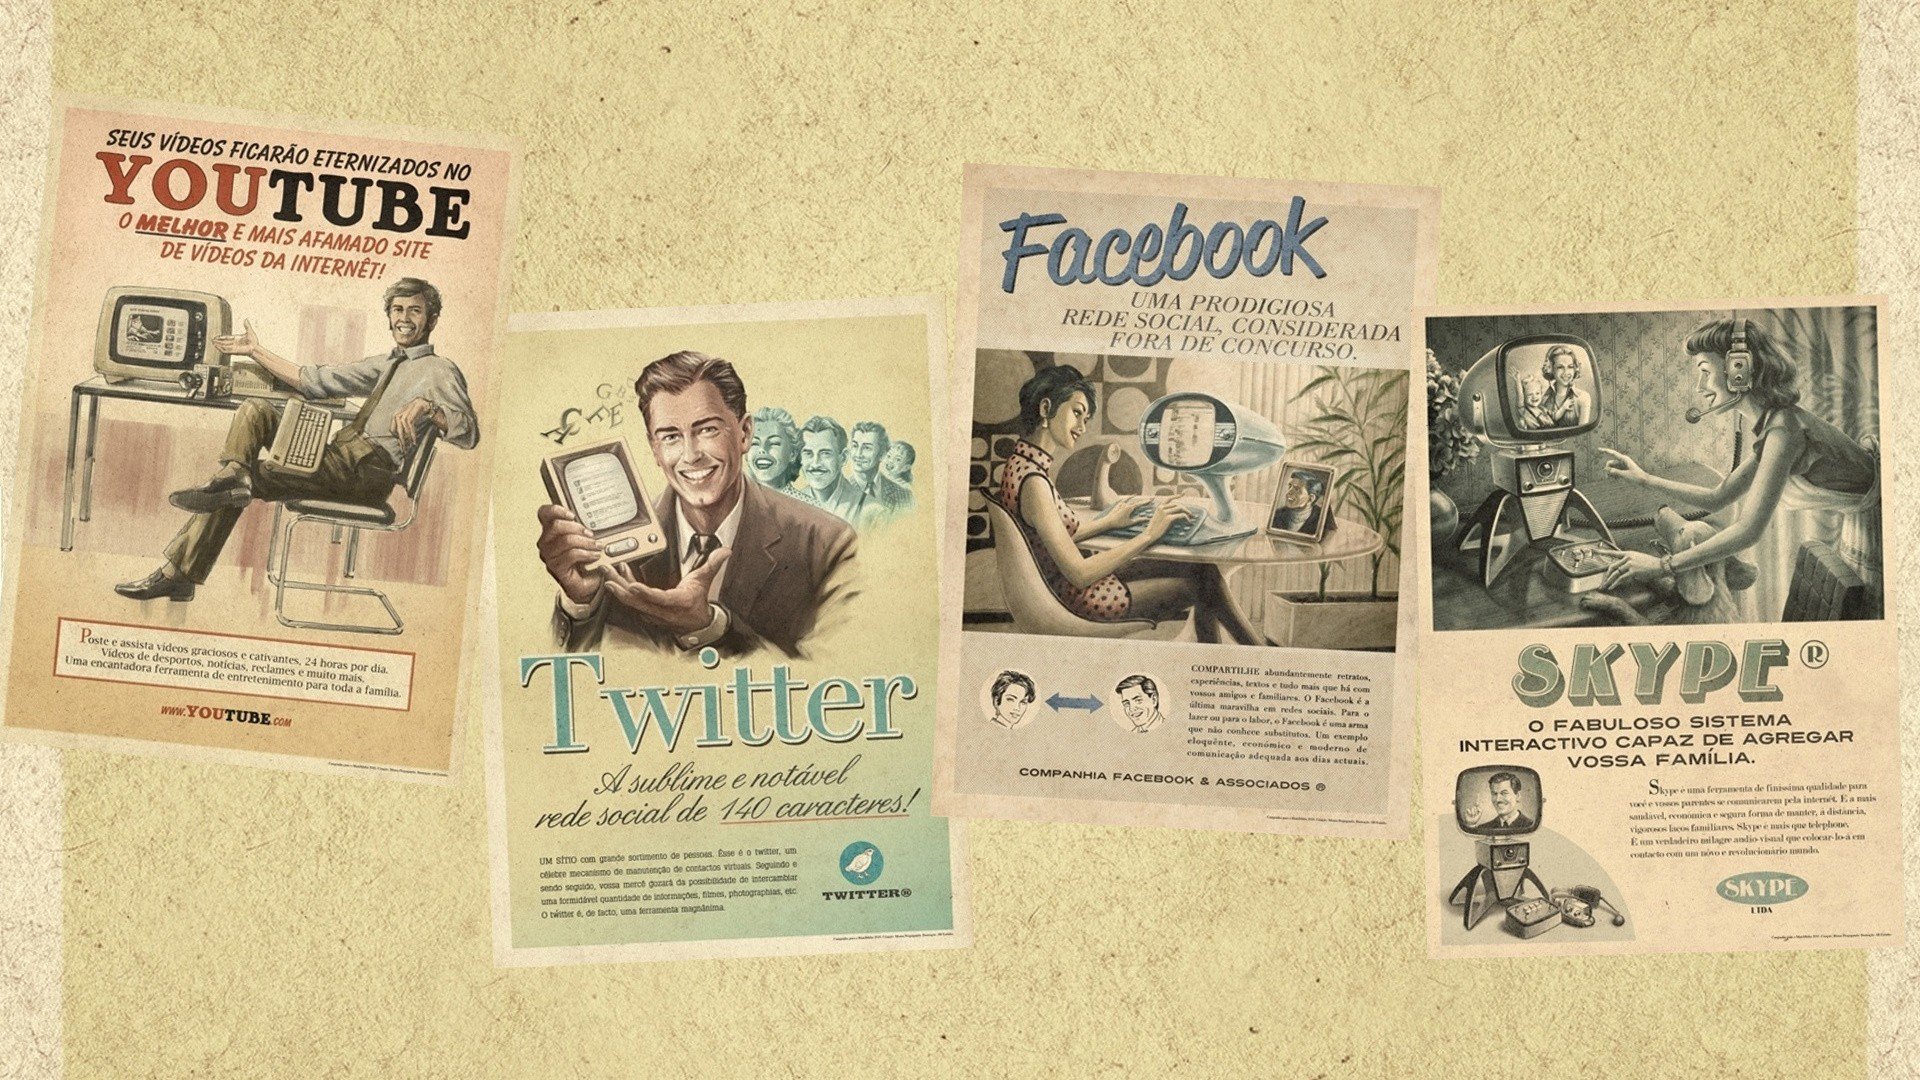 computers, Facebook, Vintage, Retro, Technology, Youtube, Twitter, Advertisement, Website, Portuguese, Skype, Old, Fashion Wallpaper